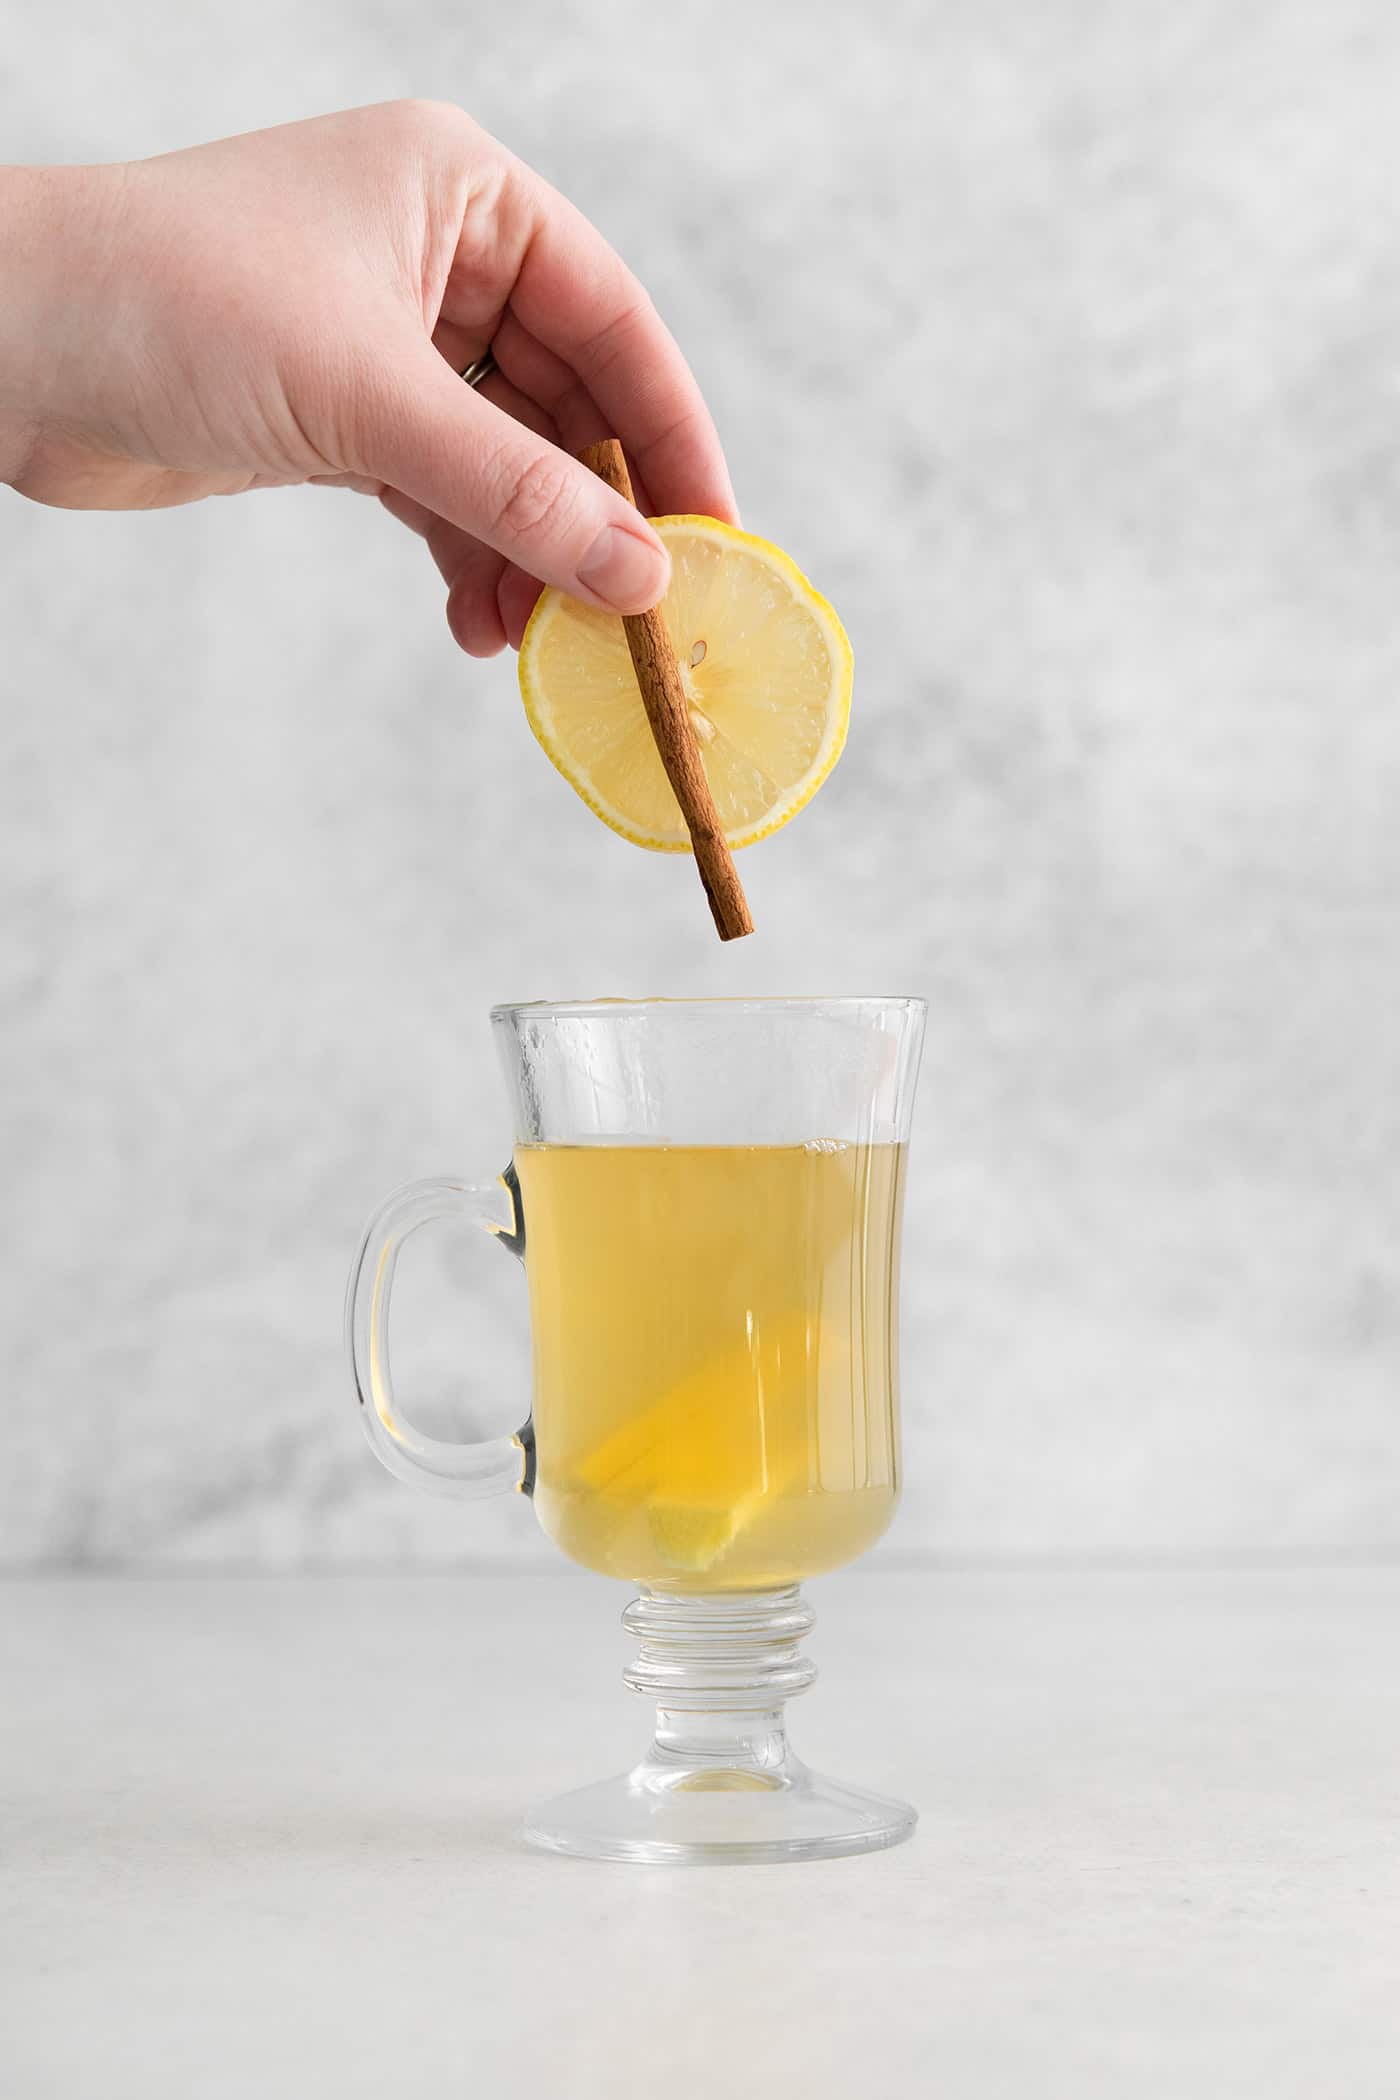 adding lemon slice and cinnamon stick to a glass of hot water with ginger